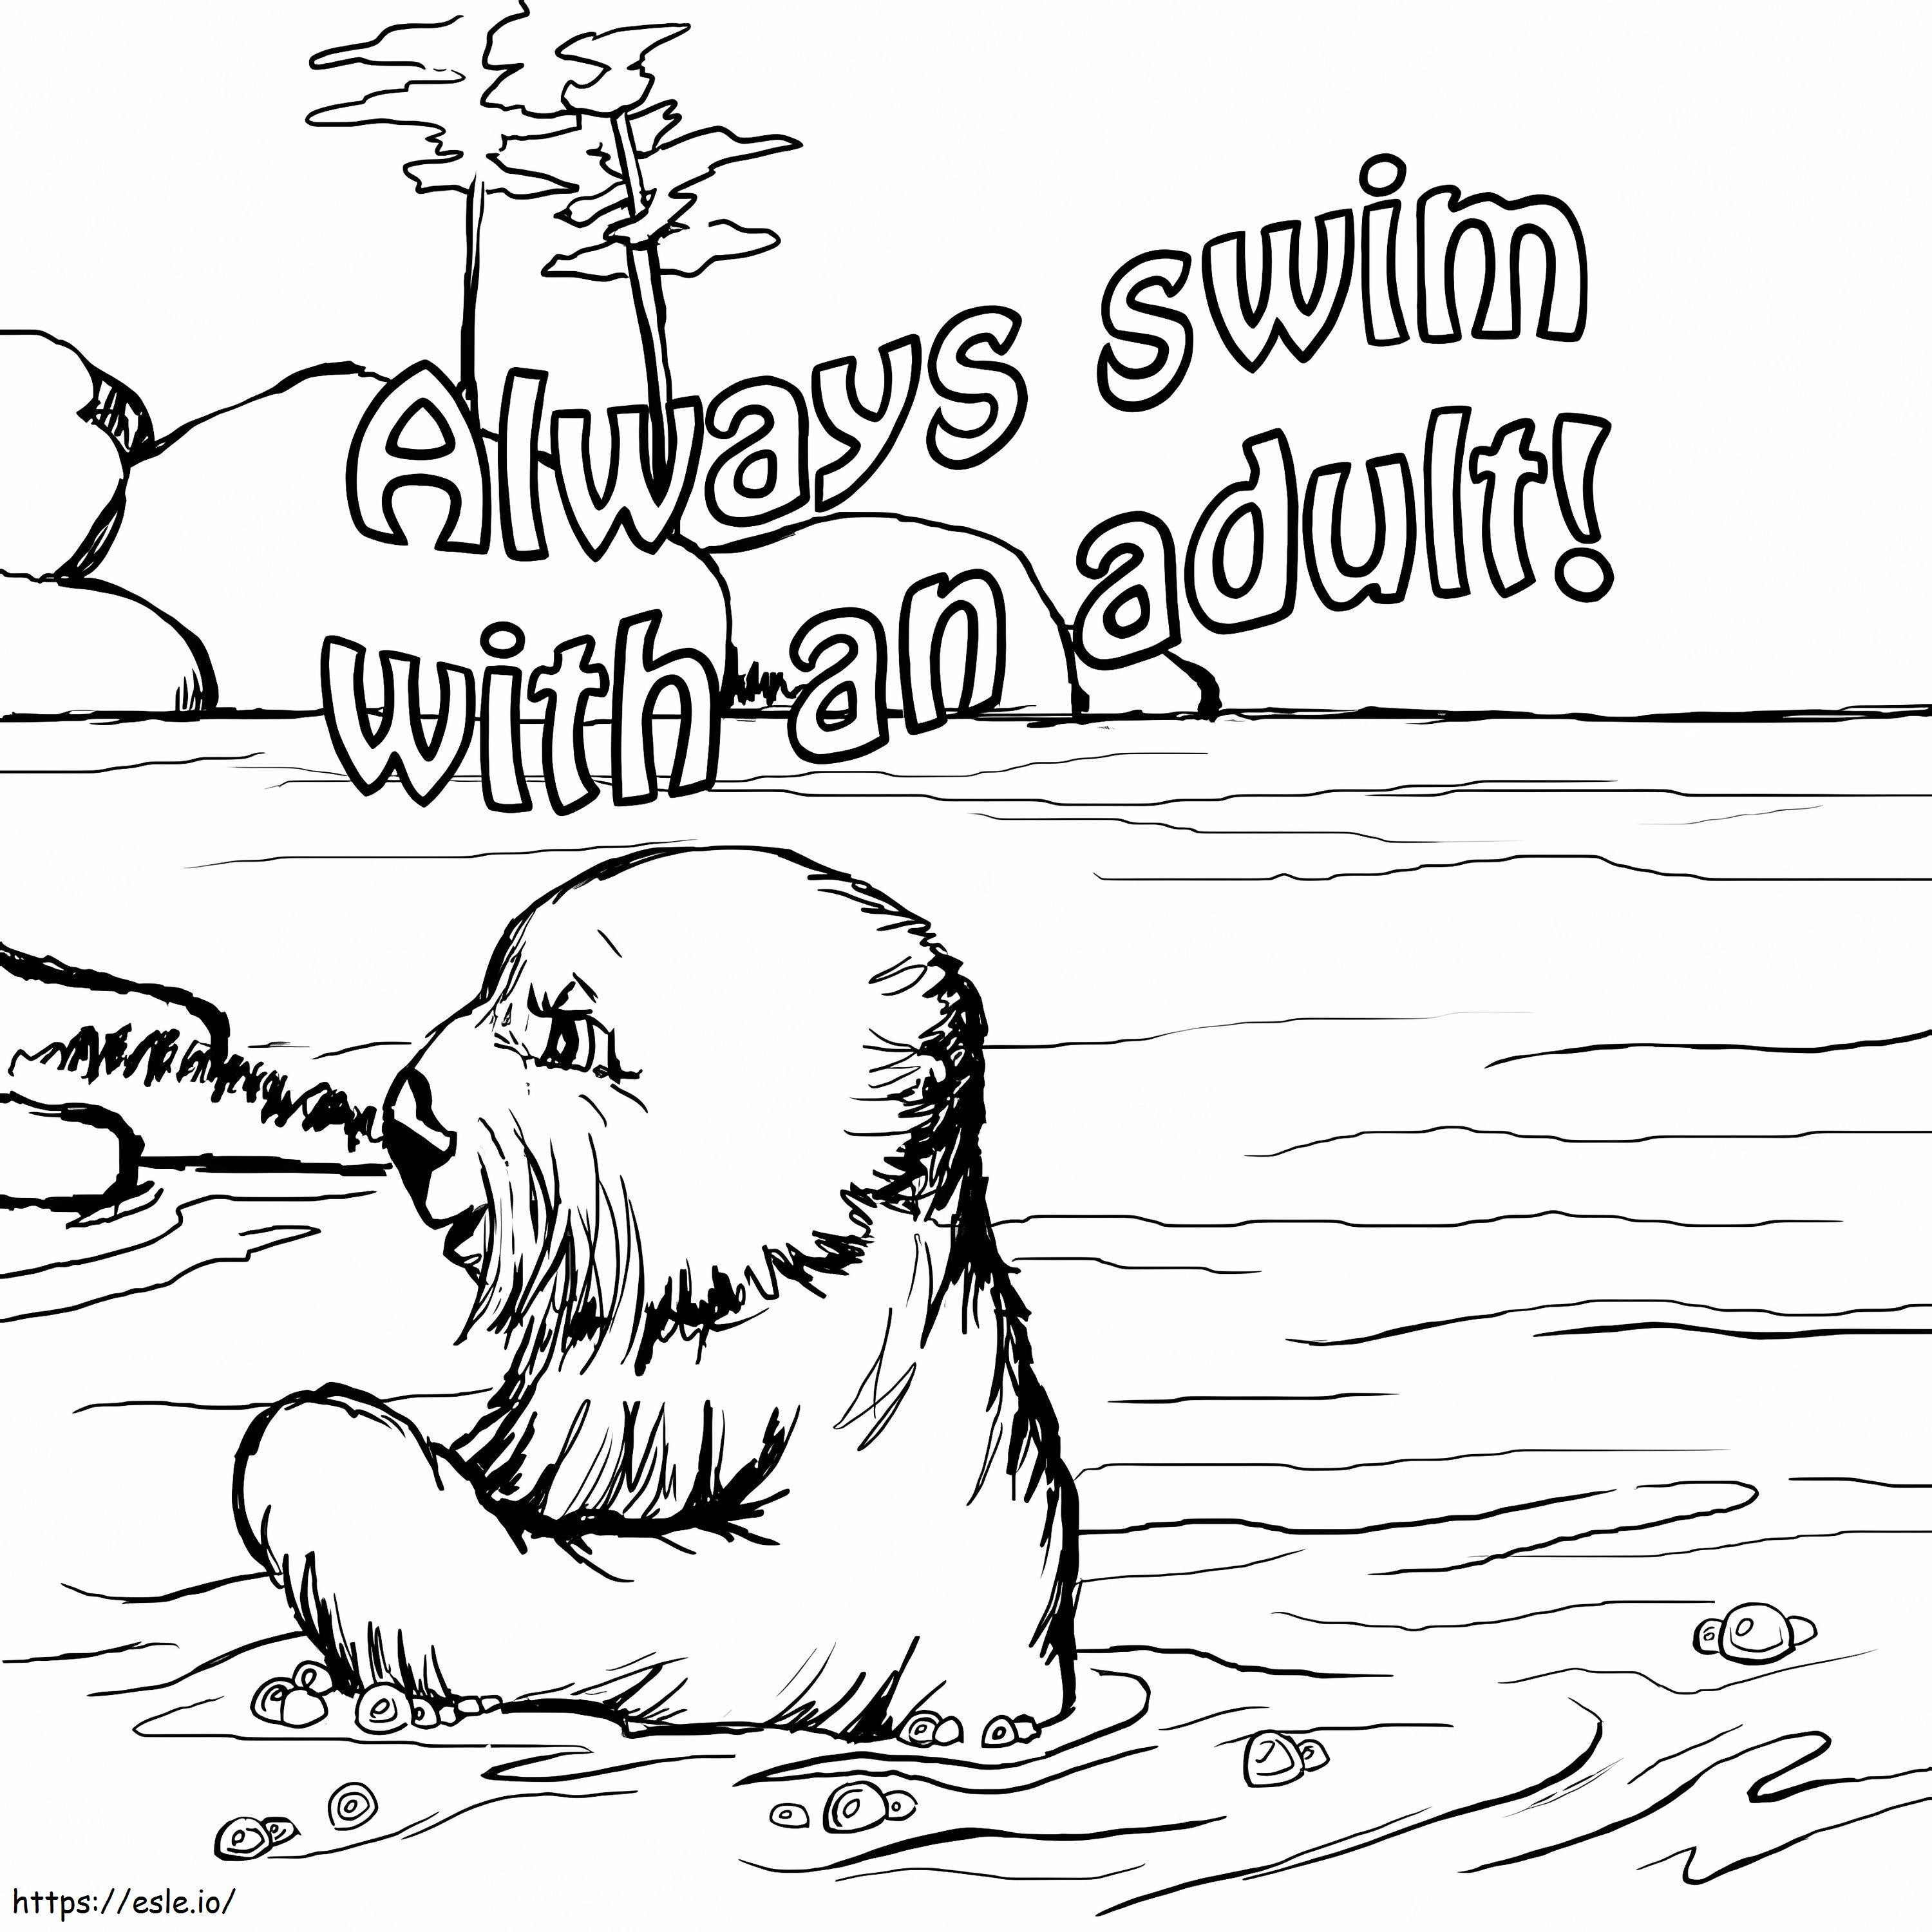 Always Swim With An Adult coloring page